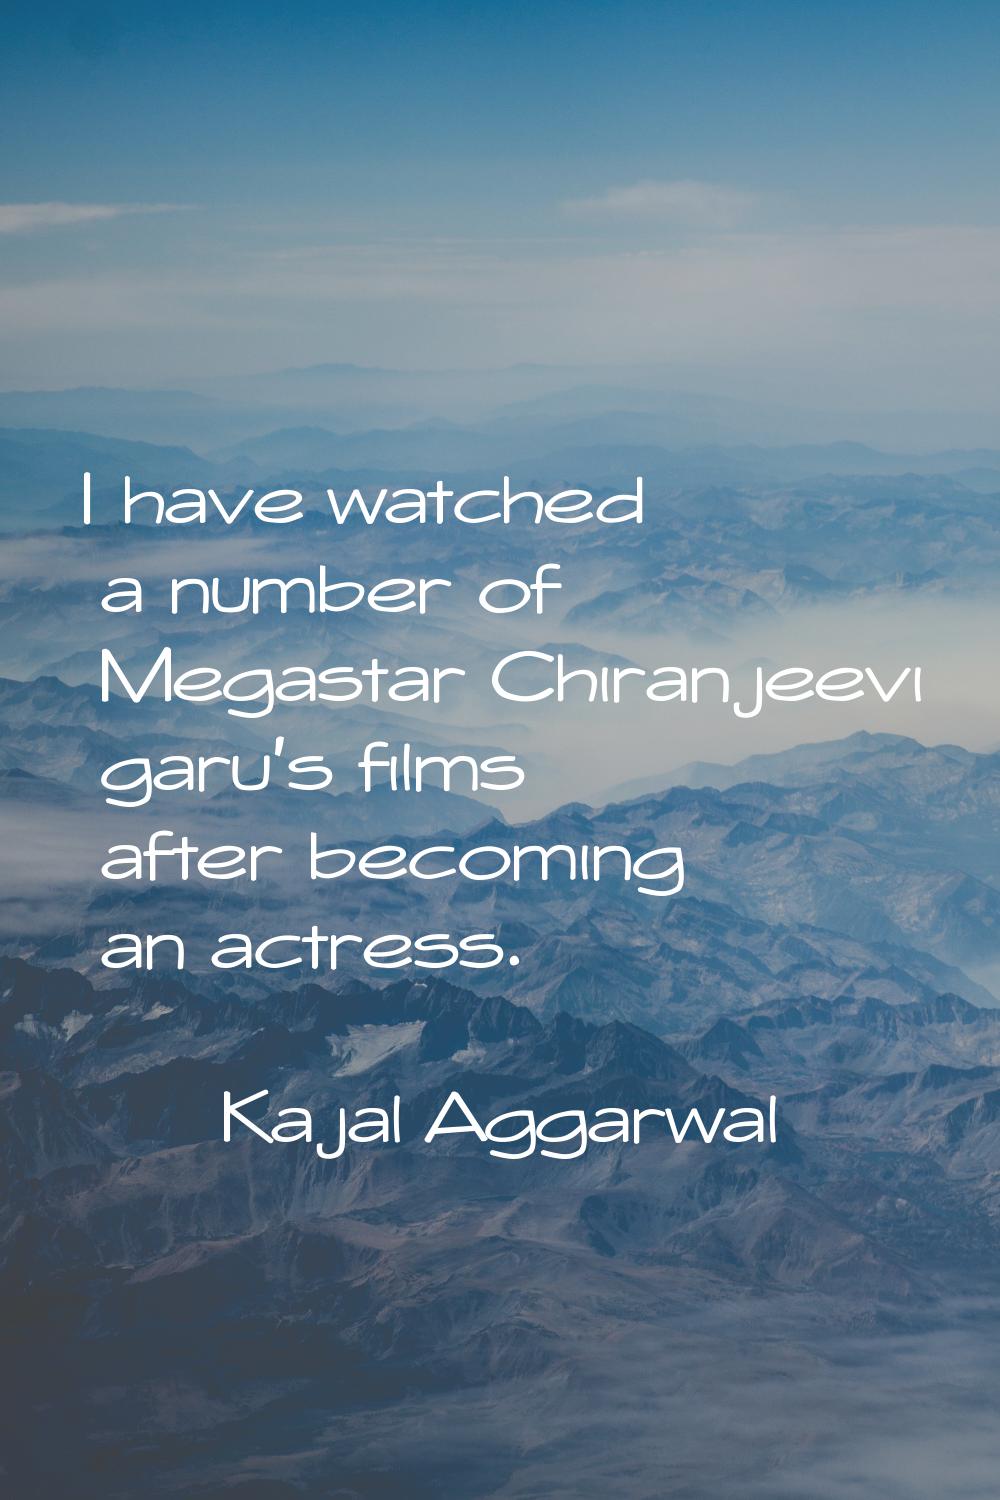 I have watched a number of Megastar Chiranjeevi garu's films after becoming an actress.